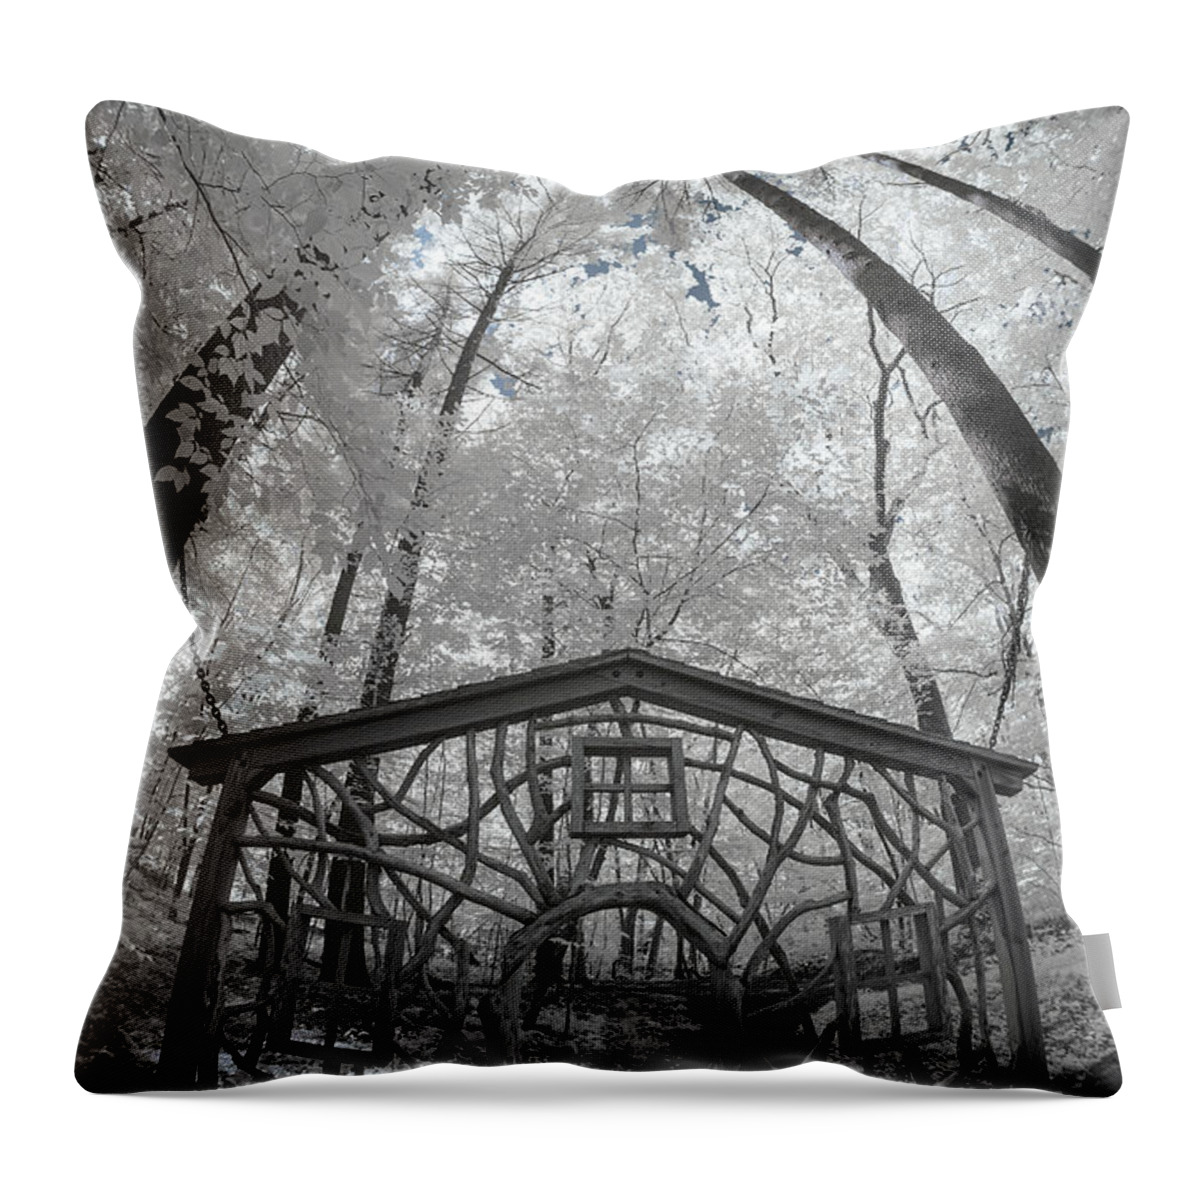 Ma Mass Massachusetts Newengland Usa U.s.a. New England Ir Infrared 720nm Brian Hale Brianhalephoto Fisheye Fish Eye Fish-eye House Frame Art Installation Trees Woods Forest Garden In The Woods Framingham Throw Pillow featuring the photograph Framed In Framingham by Brian Hale